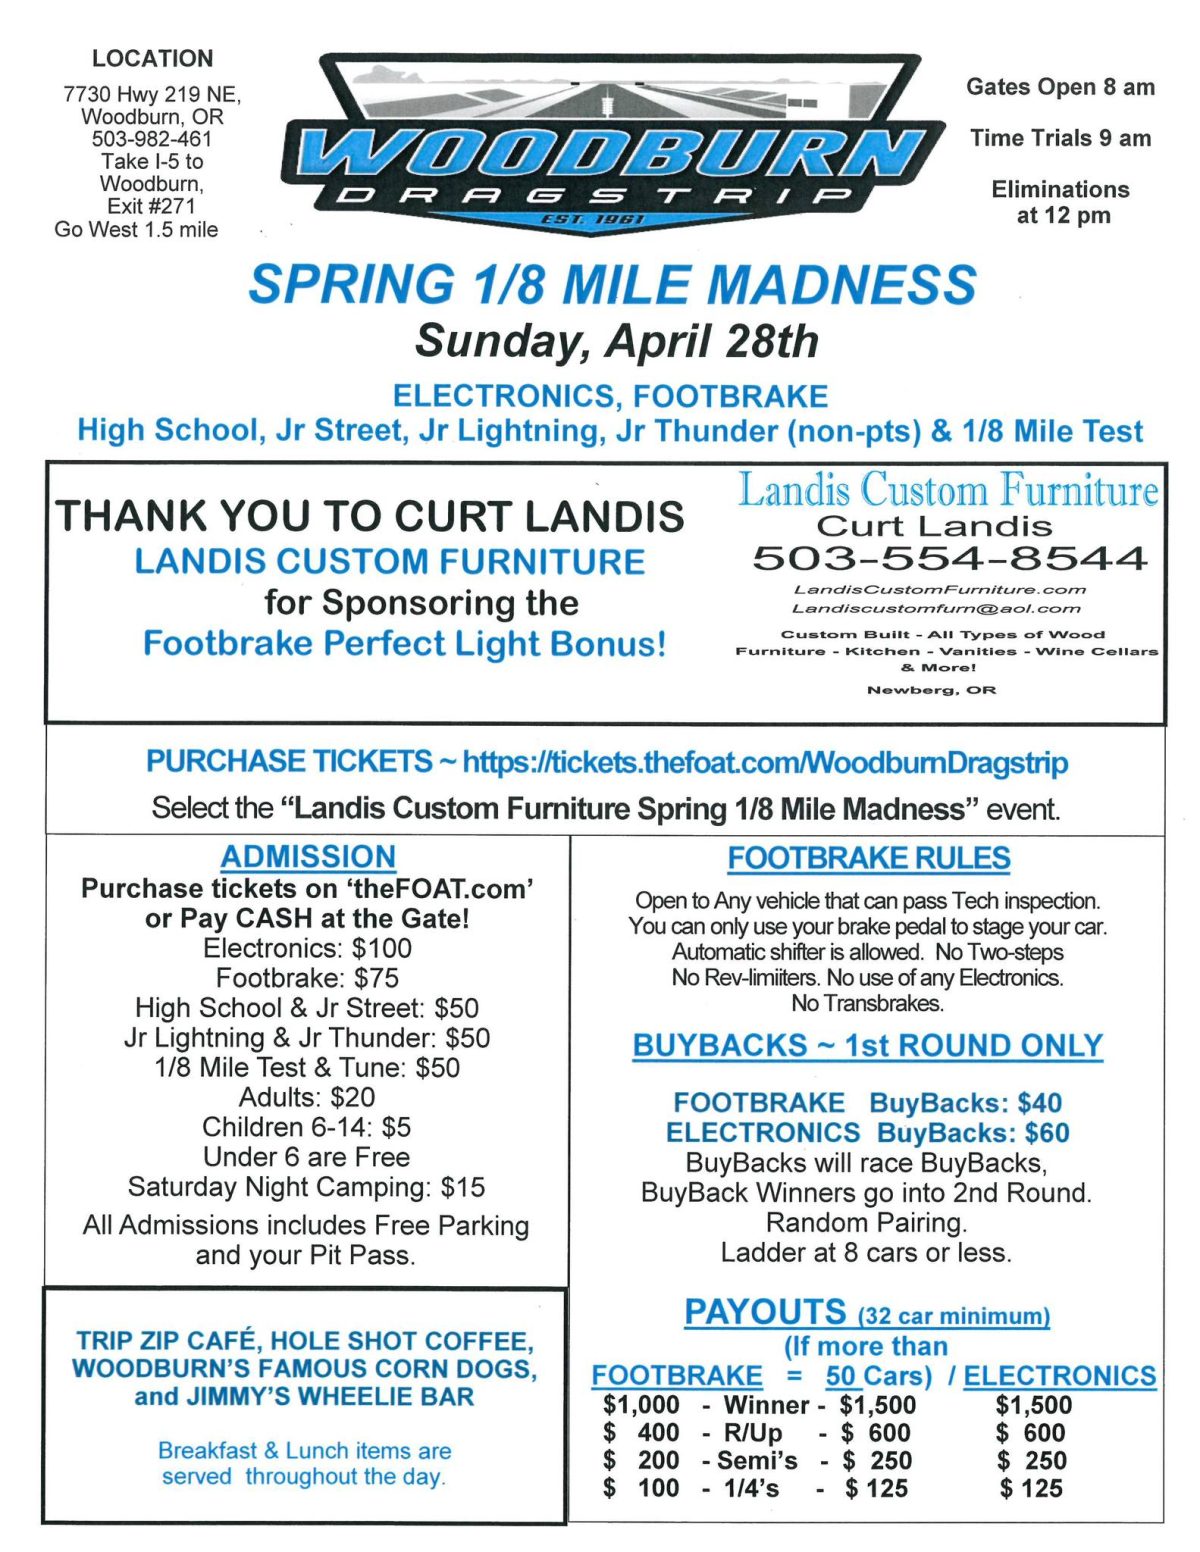 Spring 1/8 Mile Madness